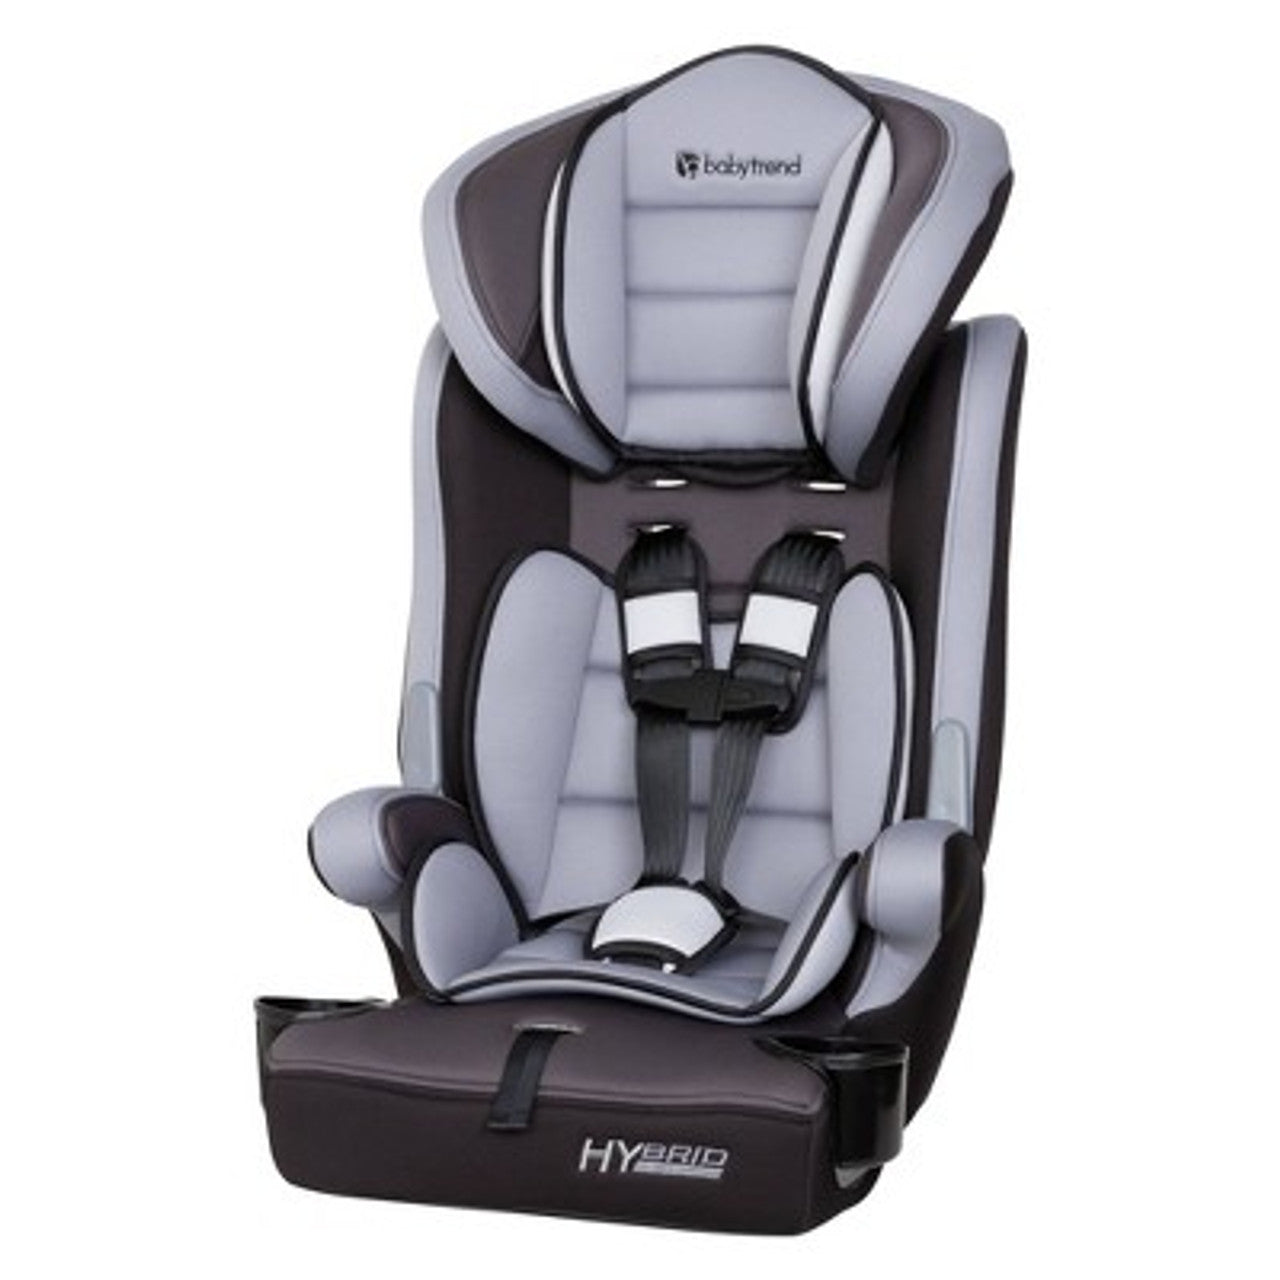 New - Baby Trend Hybrid 3-in-1 Combination Booster Car Seat - Diesel Gray